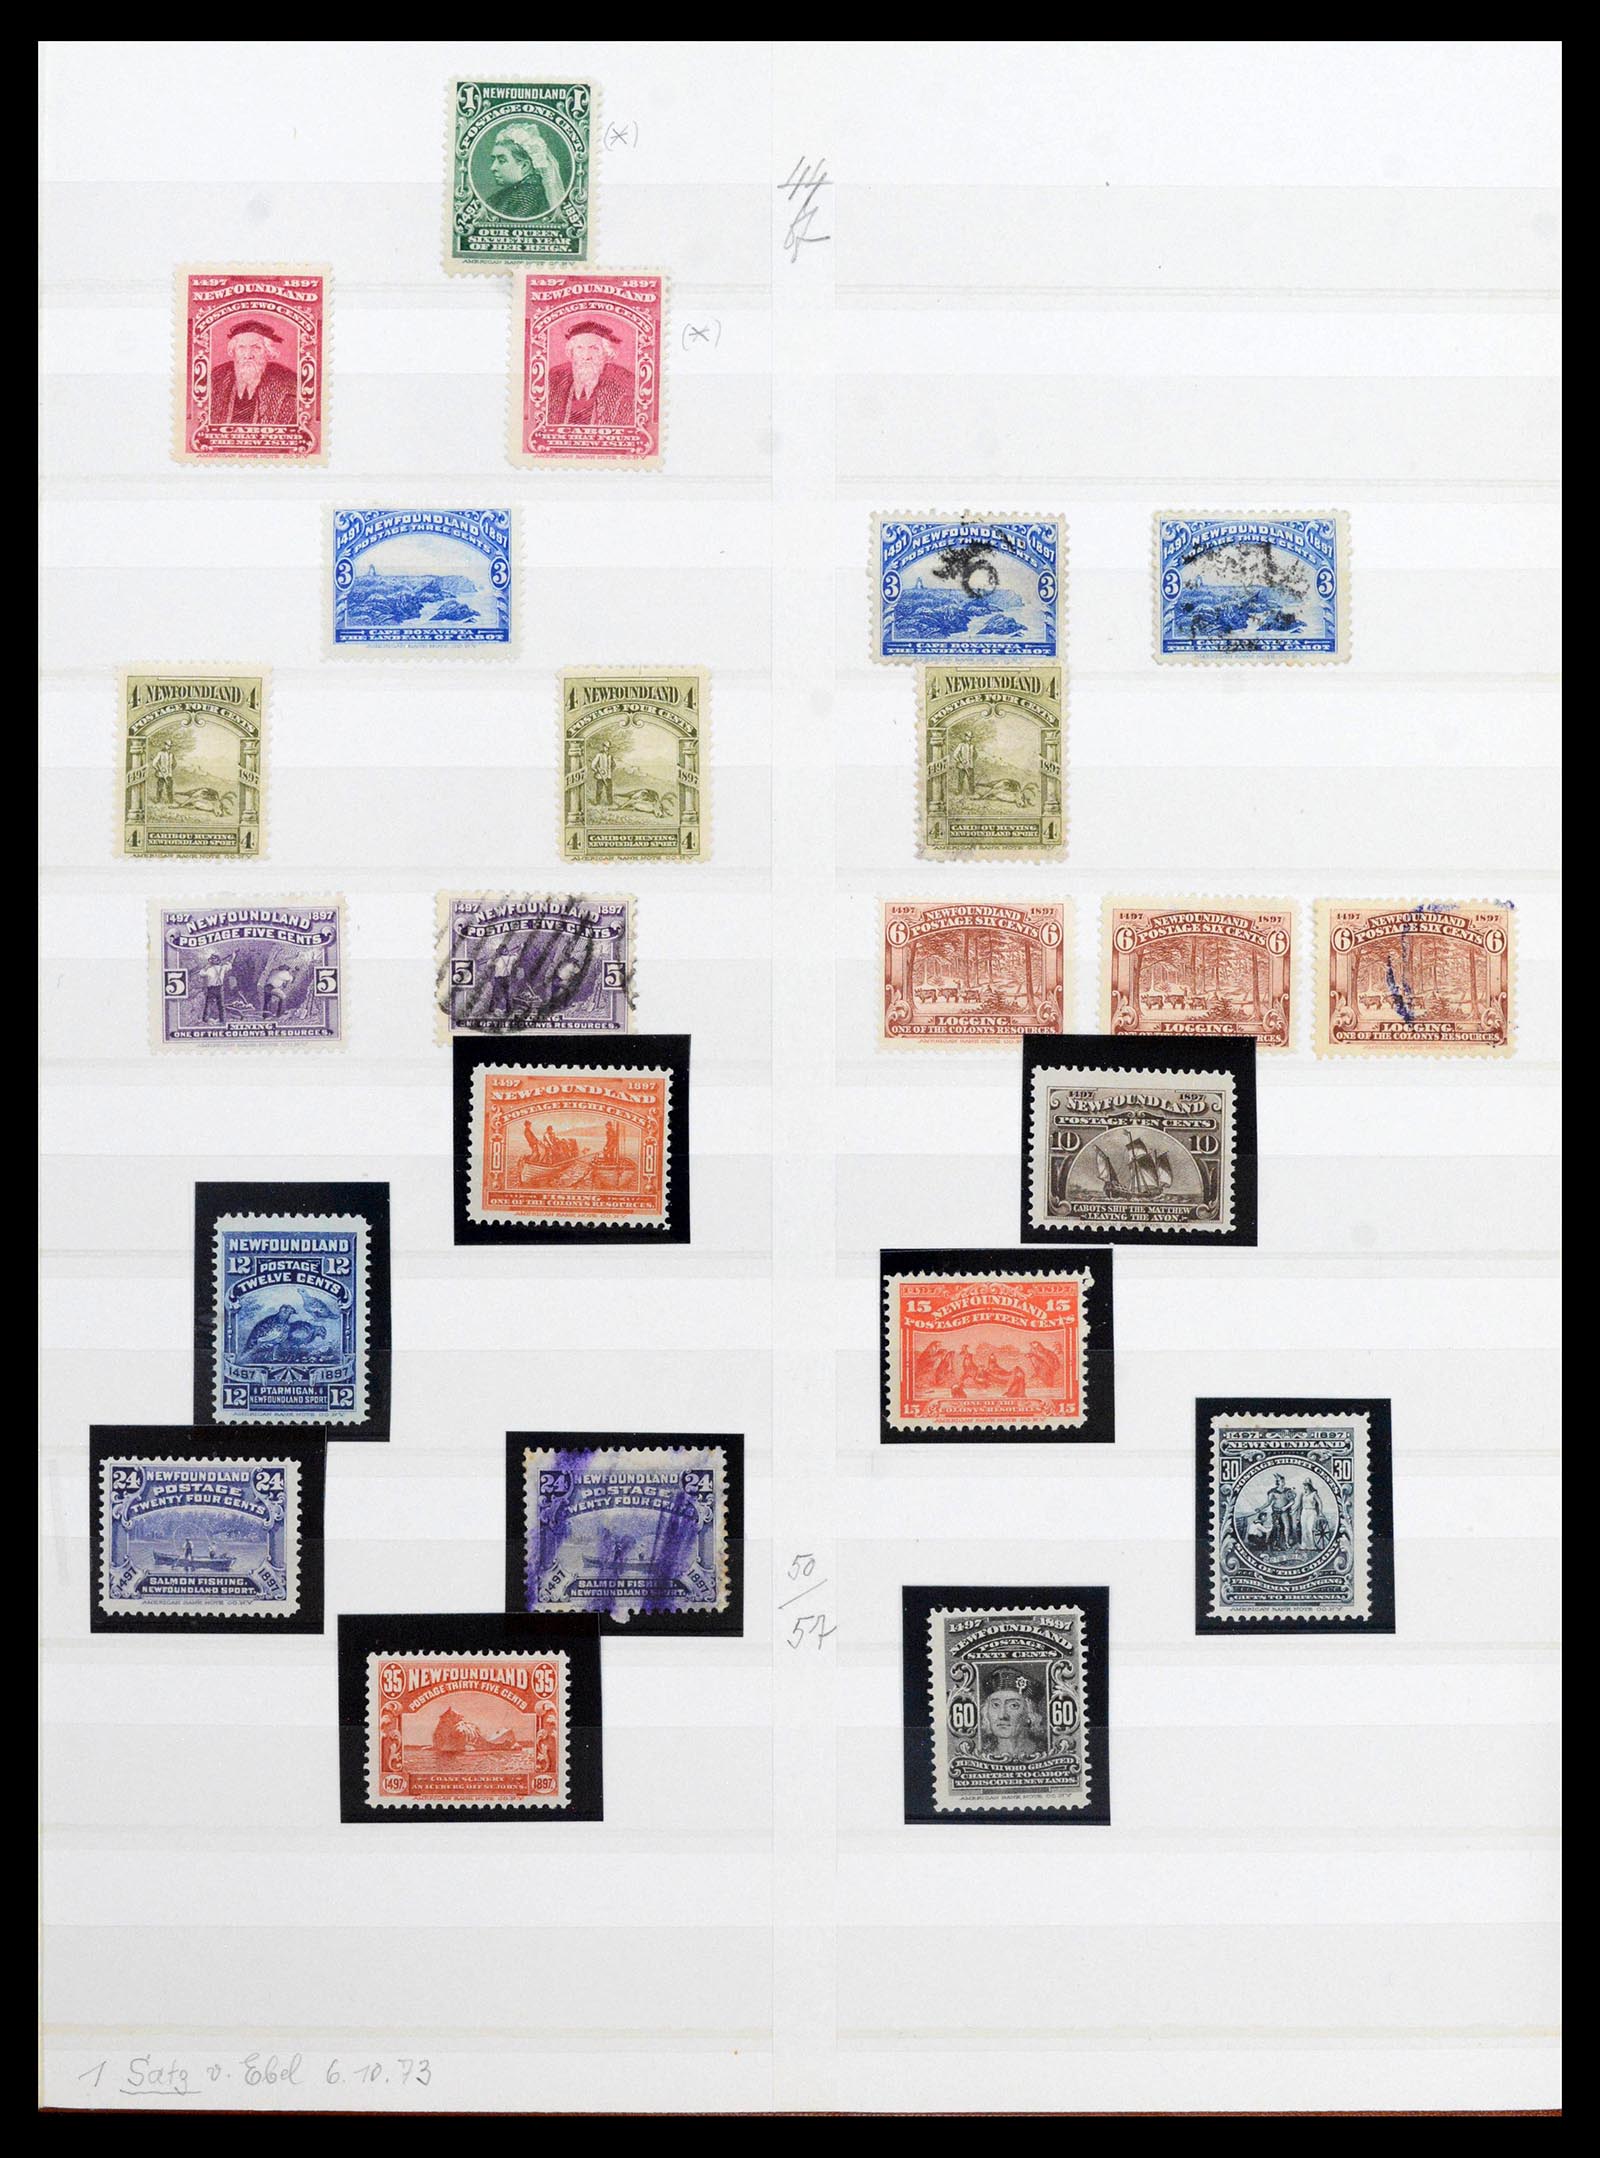 39199 0007 - Stamp collection 39199 Canada and provinces 1851-1970.